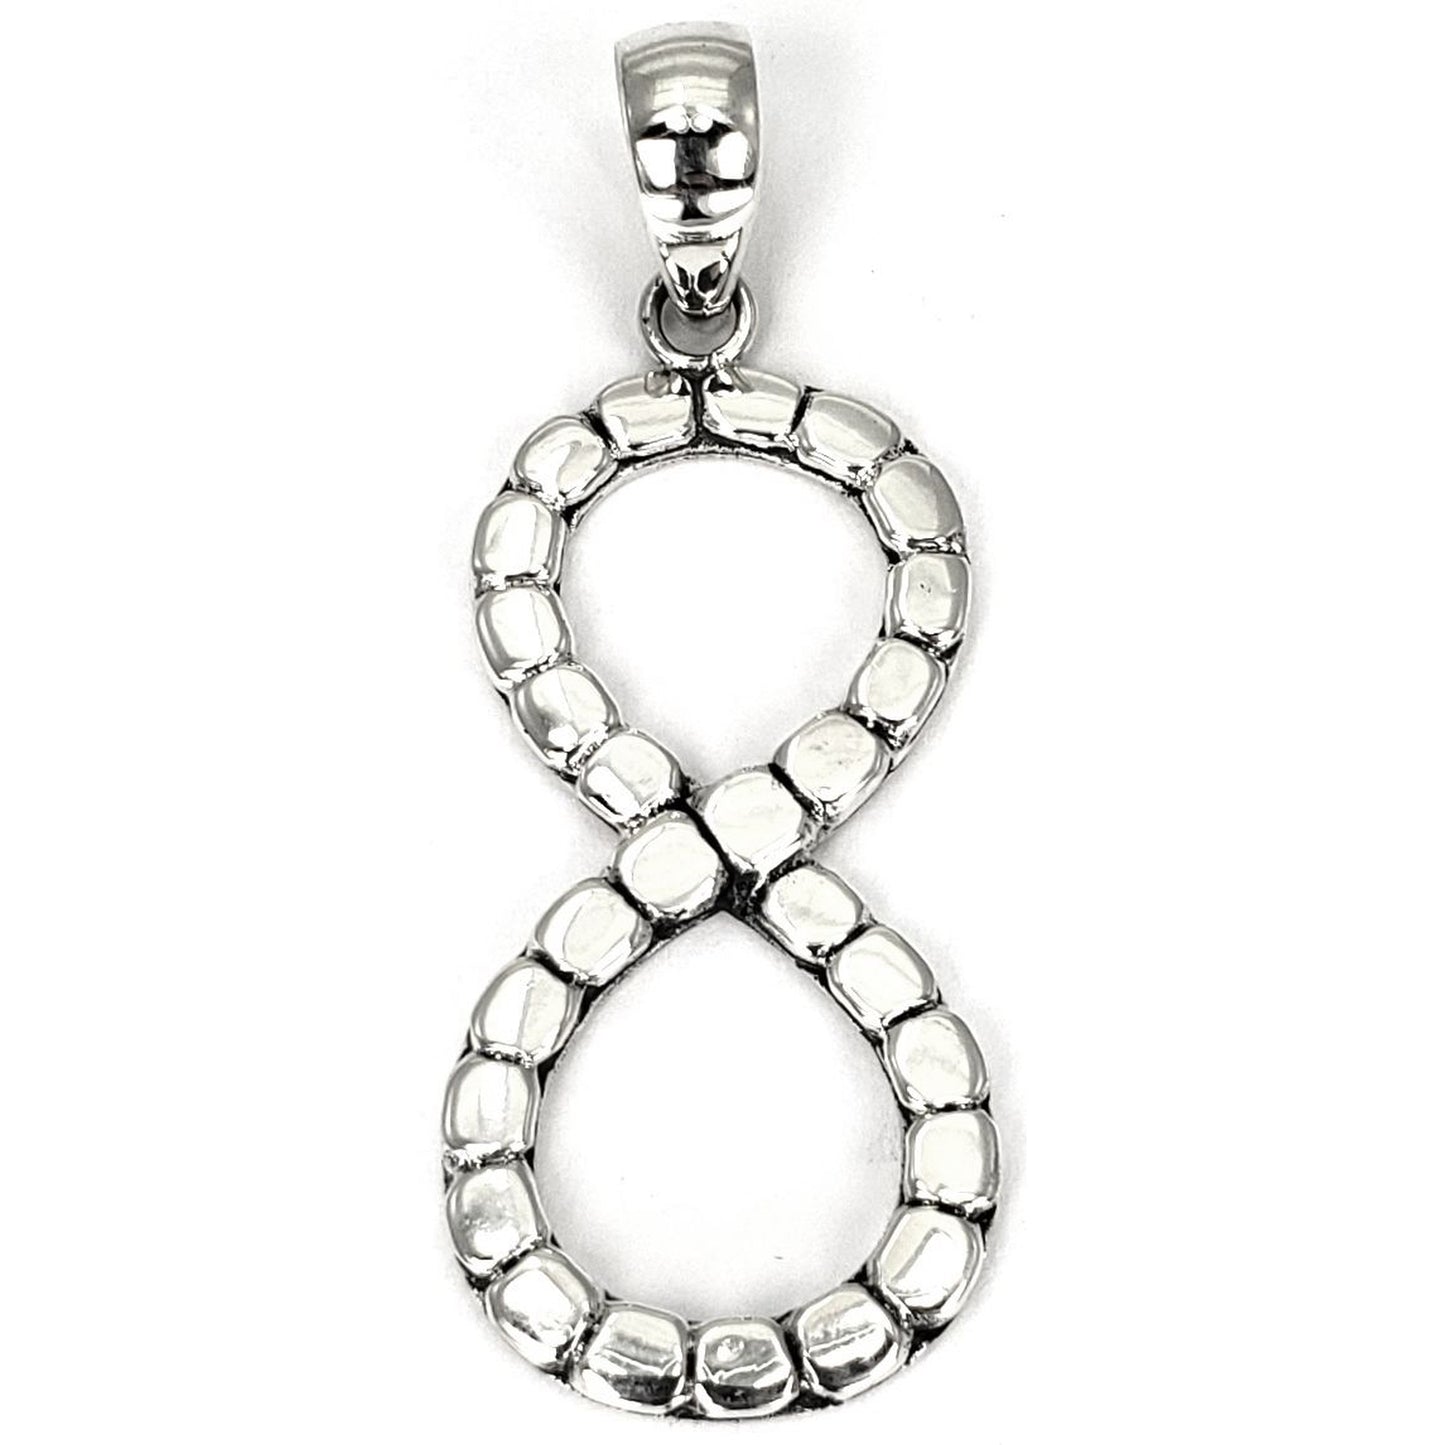 P888 KALA .925 Sterling Silver Figure Eight Infinity Pendant from Bali